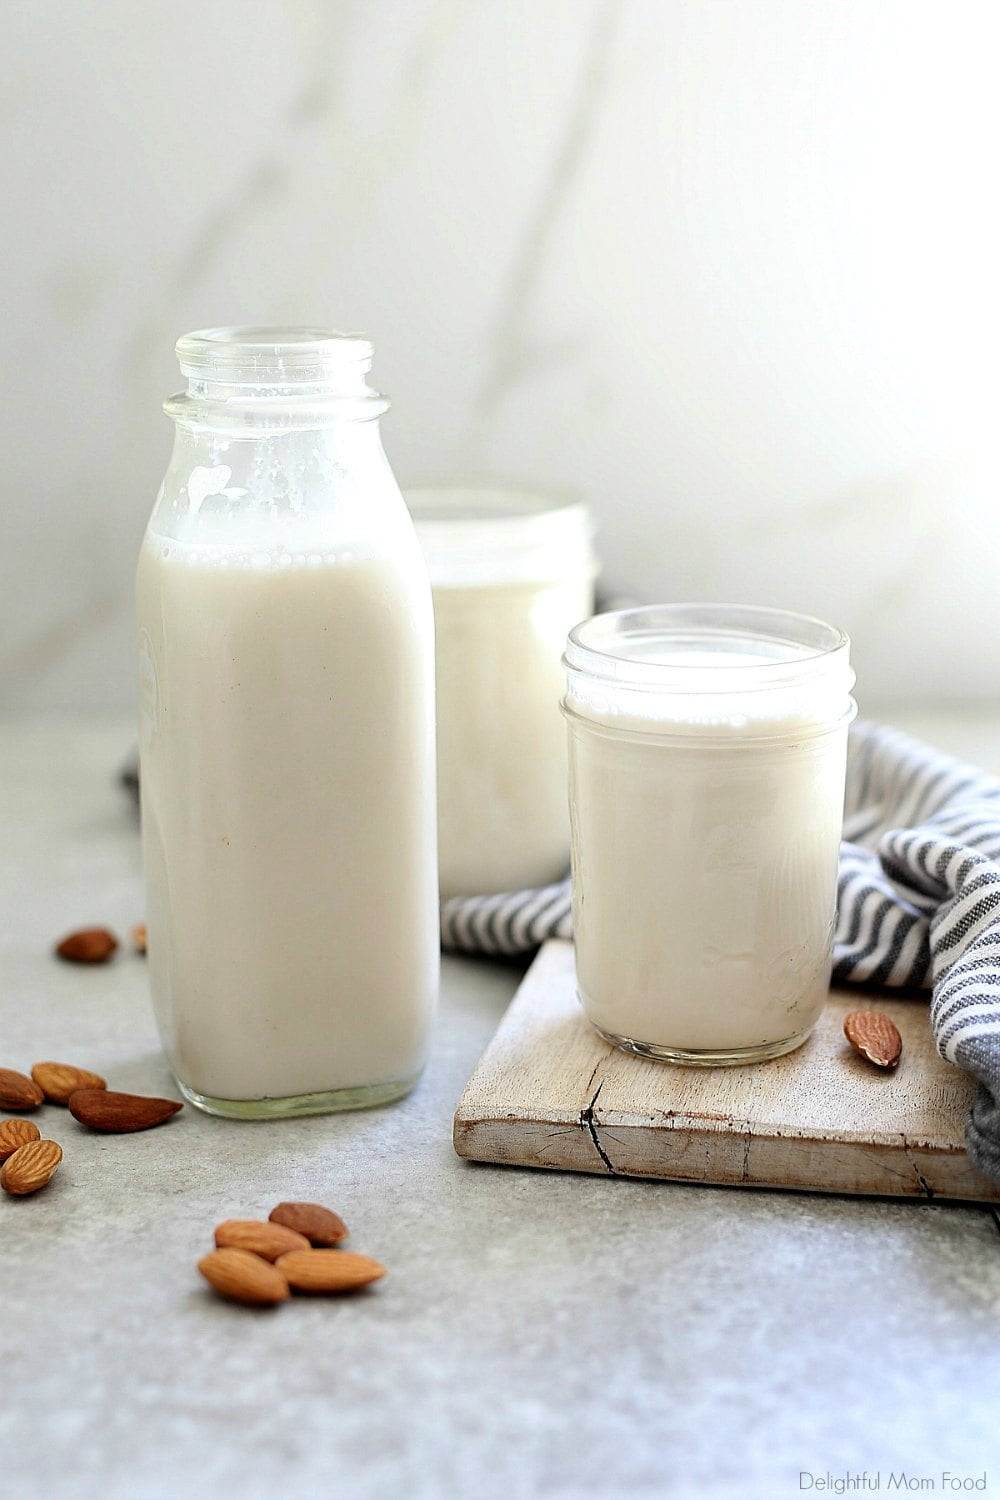 This DIY almond milk recipe is delicious, creamy and tastes better than any store-bought version! Making homemade almond milk takes as little as 10 minutes plus soaking the almonds overnight. Use this recipe as a base guideline for any nut milk recipe. #plantbasedmilk #nondairybeverage #veganmilk #dairyfreemilk #diyalmondmilk #almondmilkrecipe #homemademilk #healthy #drinks #beverage | Recipe at Delightful Mom Food